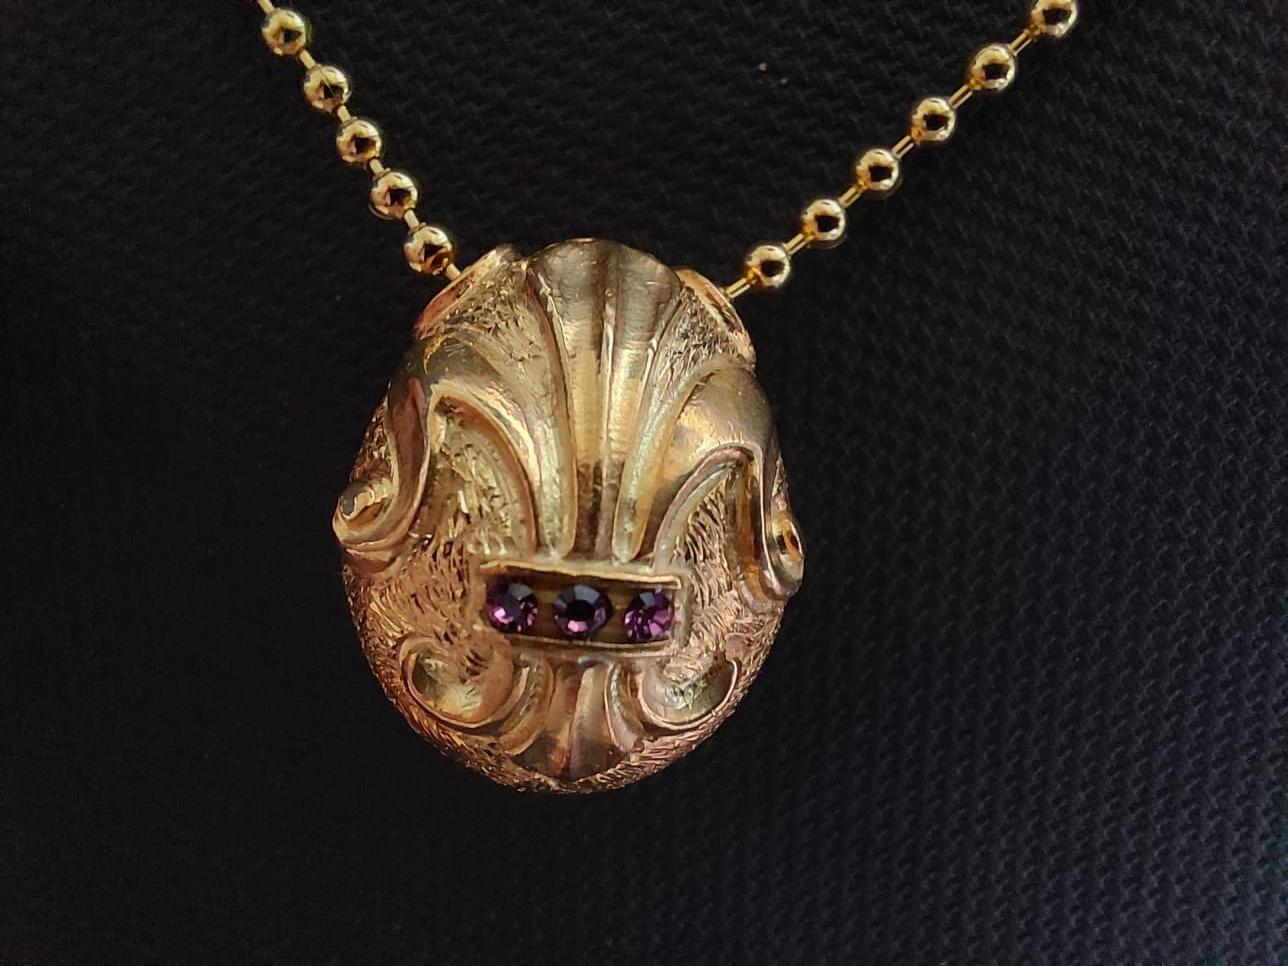 The “IRIS Fabergè Style” Gold pendant is part of our Work of Art  - Jewellery collection.
This Jewel is handcrafted completely by Workmaster Fabergé Stefano Vigni, who created the piece, chiselled and enameled its surface.
There are two variants of